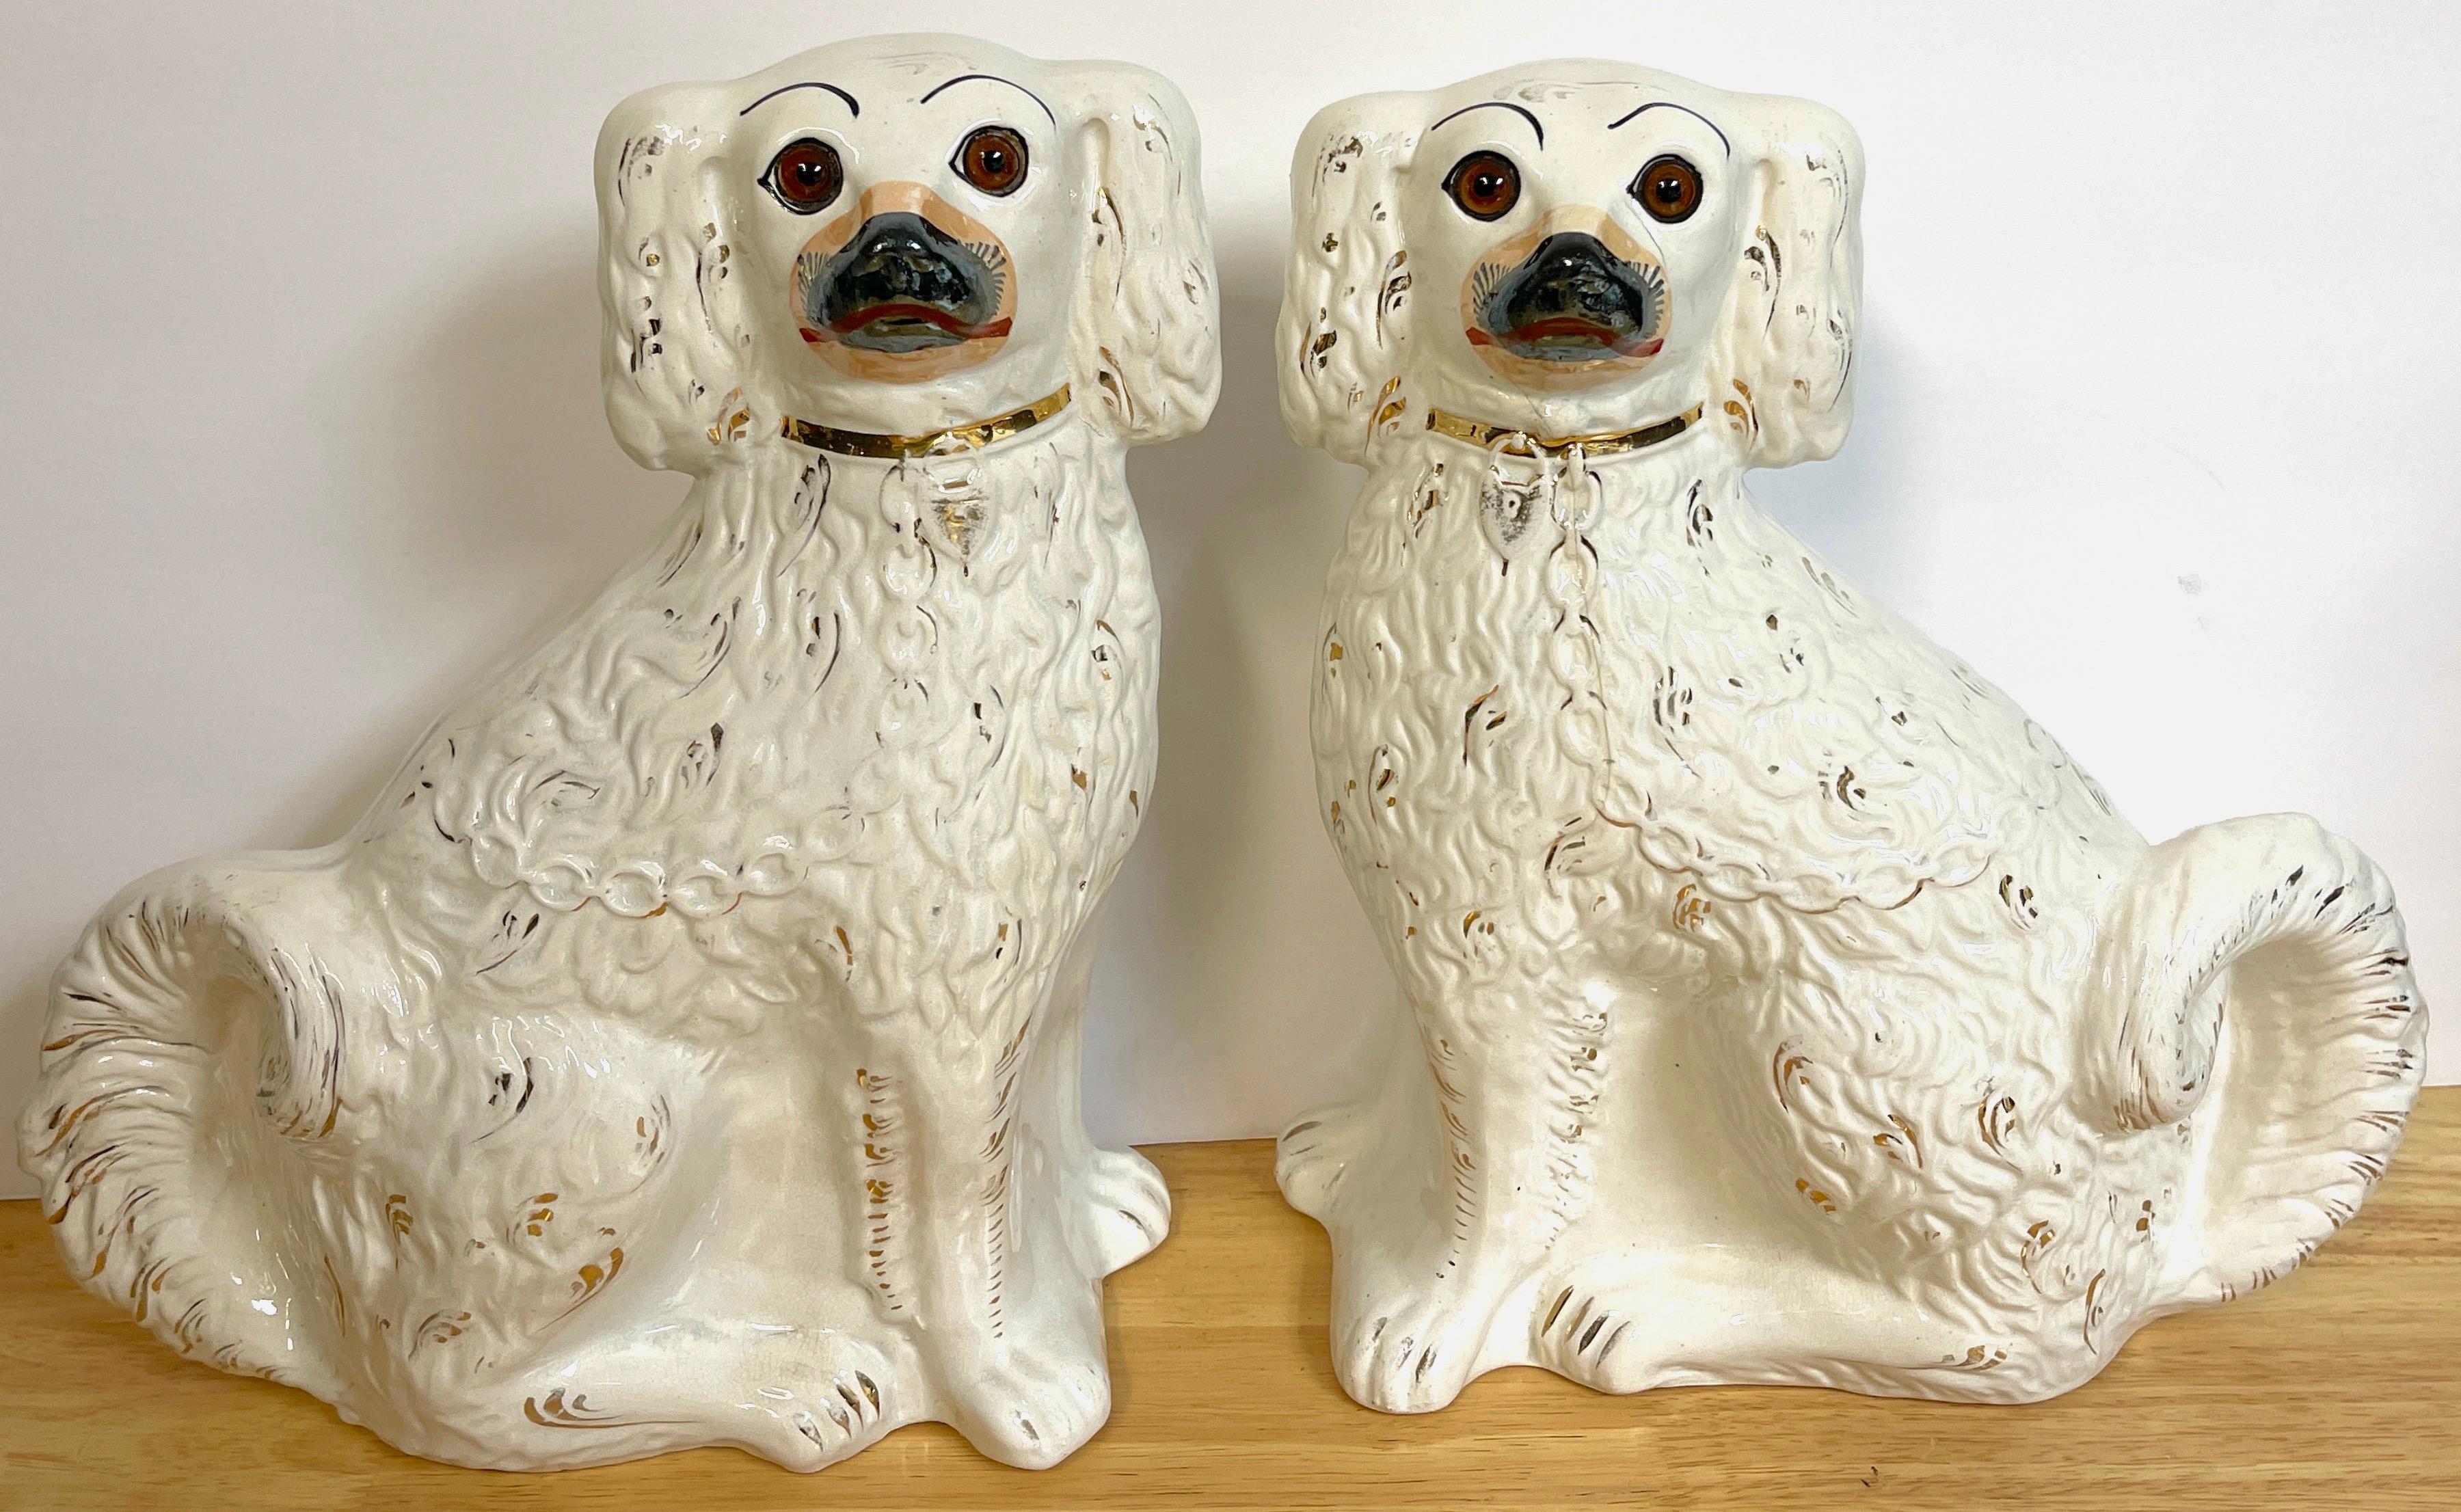 Pair of 19th century white & gilt decorated Staffordshire dogs, an unusual pair, well painted and modeled. Each one a standing spaniel with inset glass eyes and an extended back leg, nice patina.